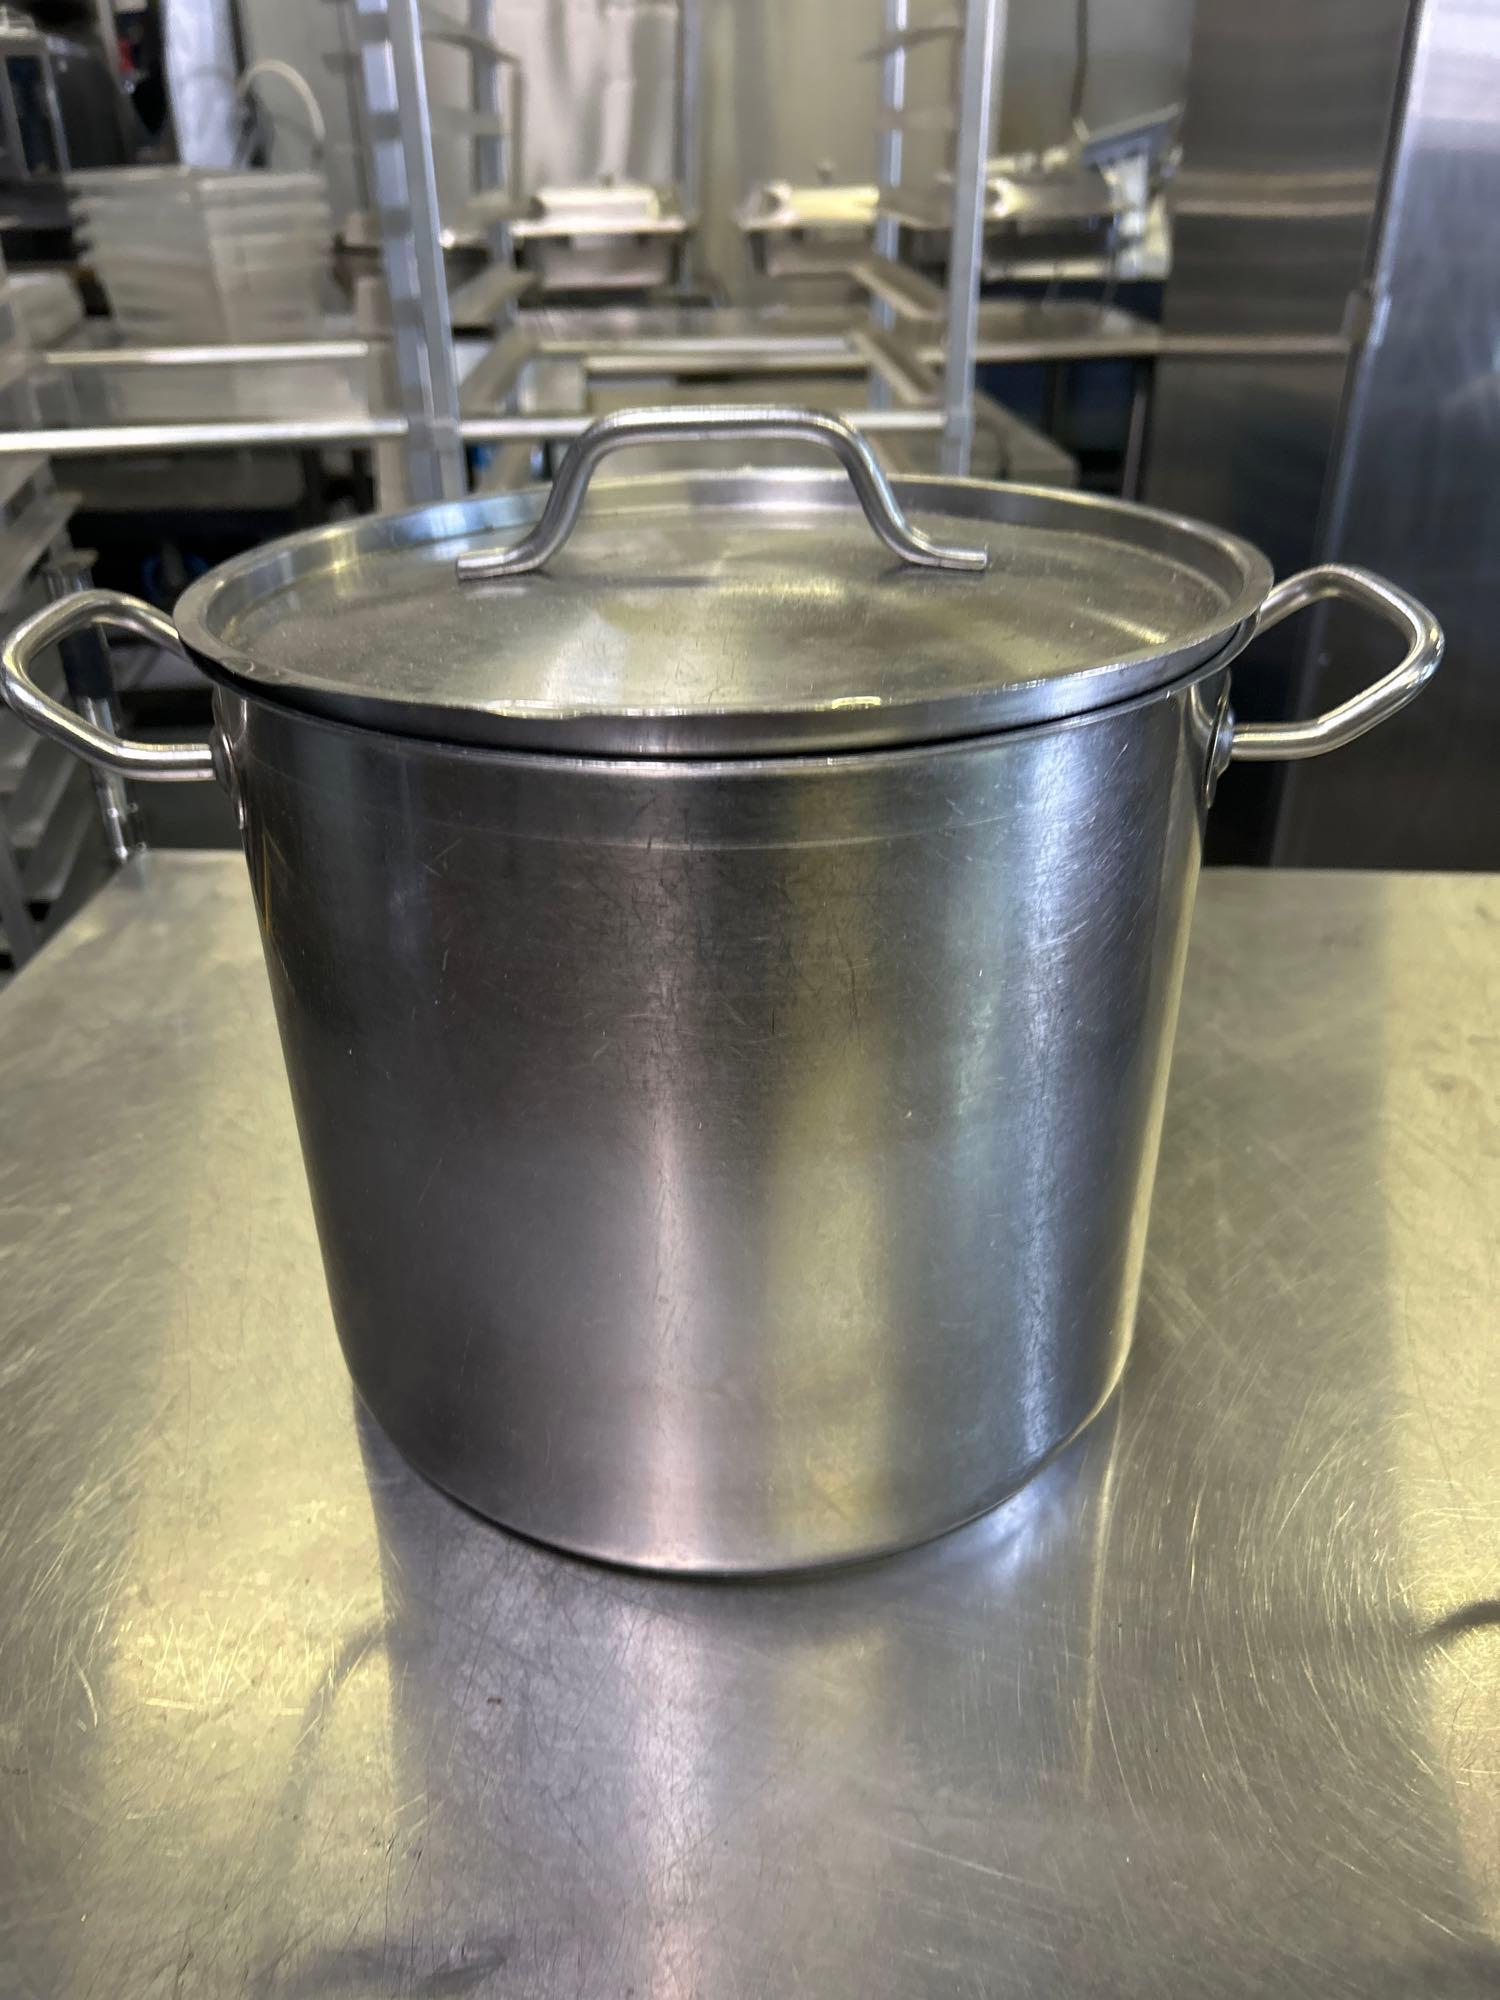 Lot of 3 Assorted Size Stainless Steel Stock Pots